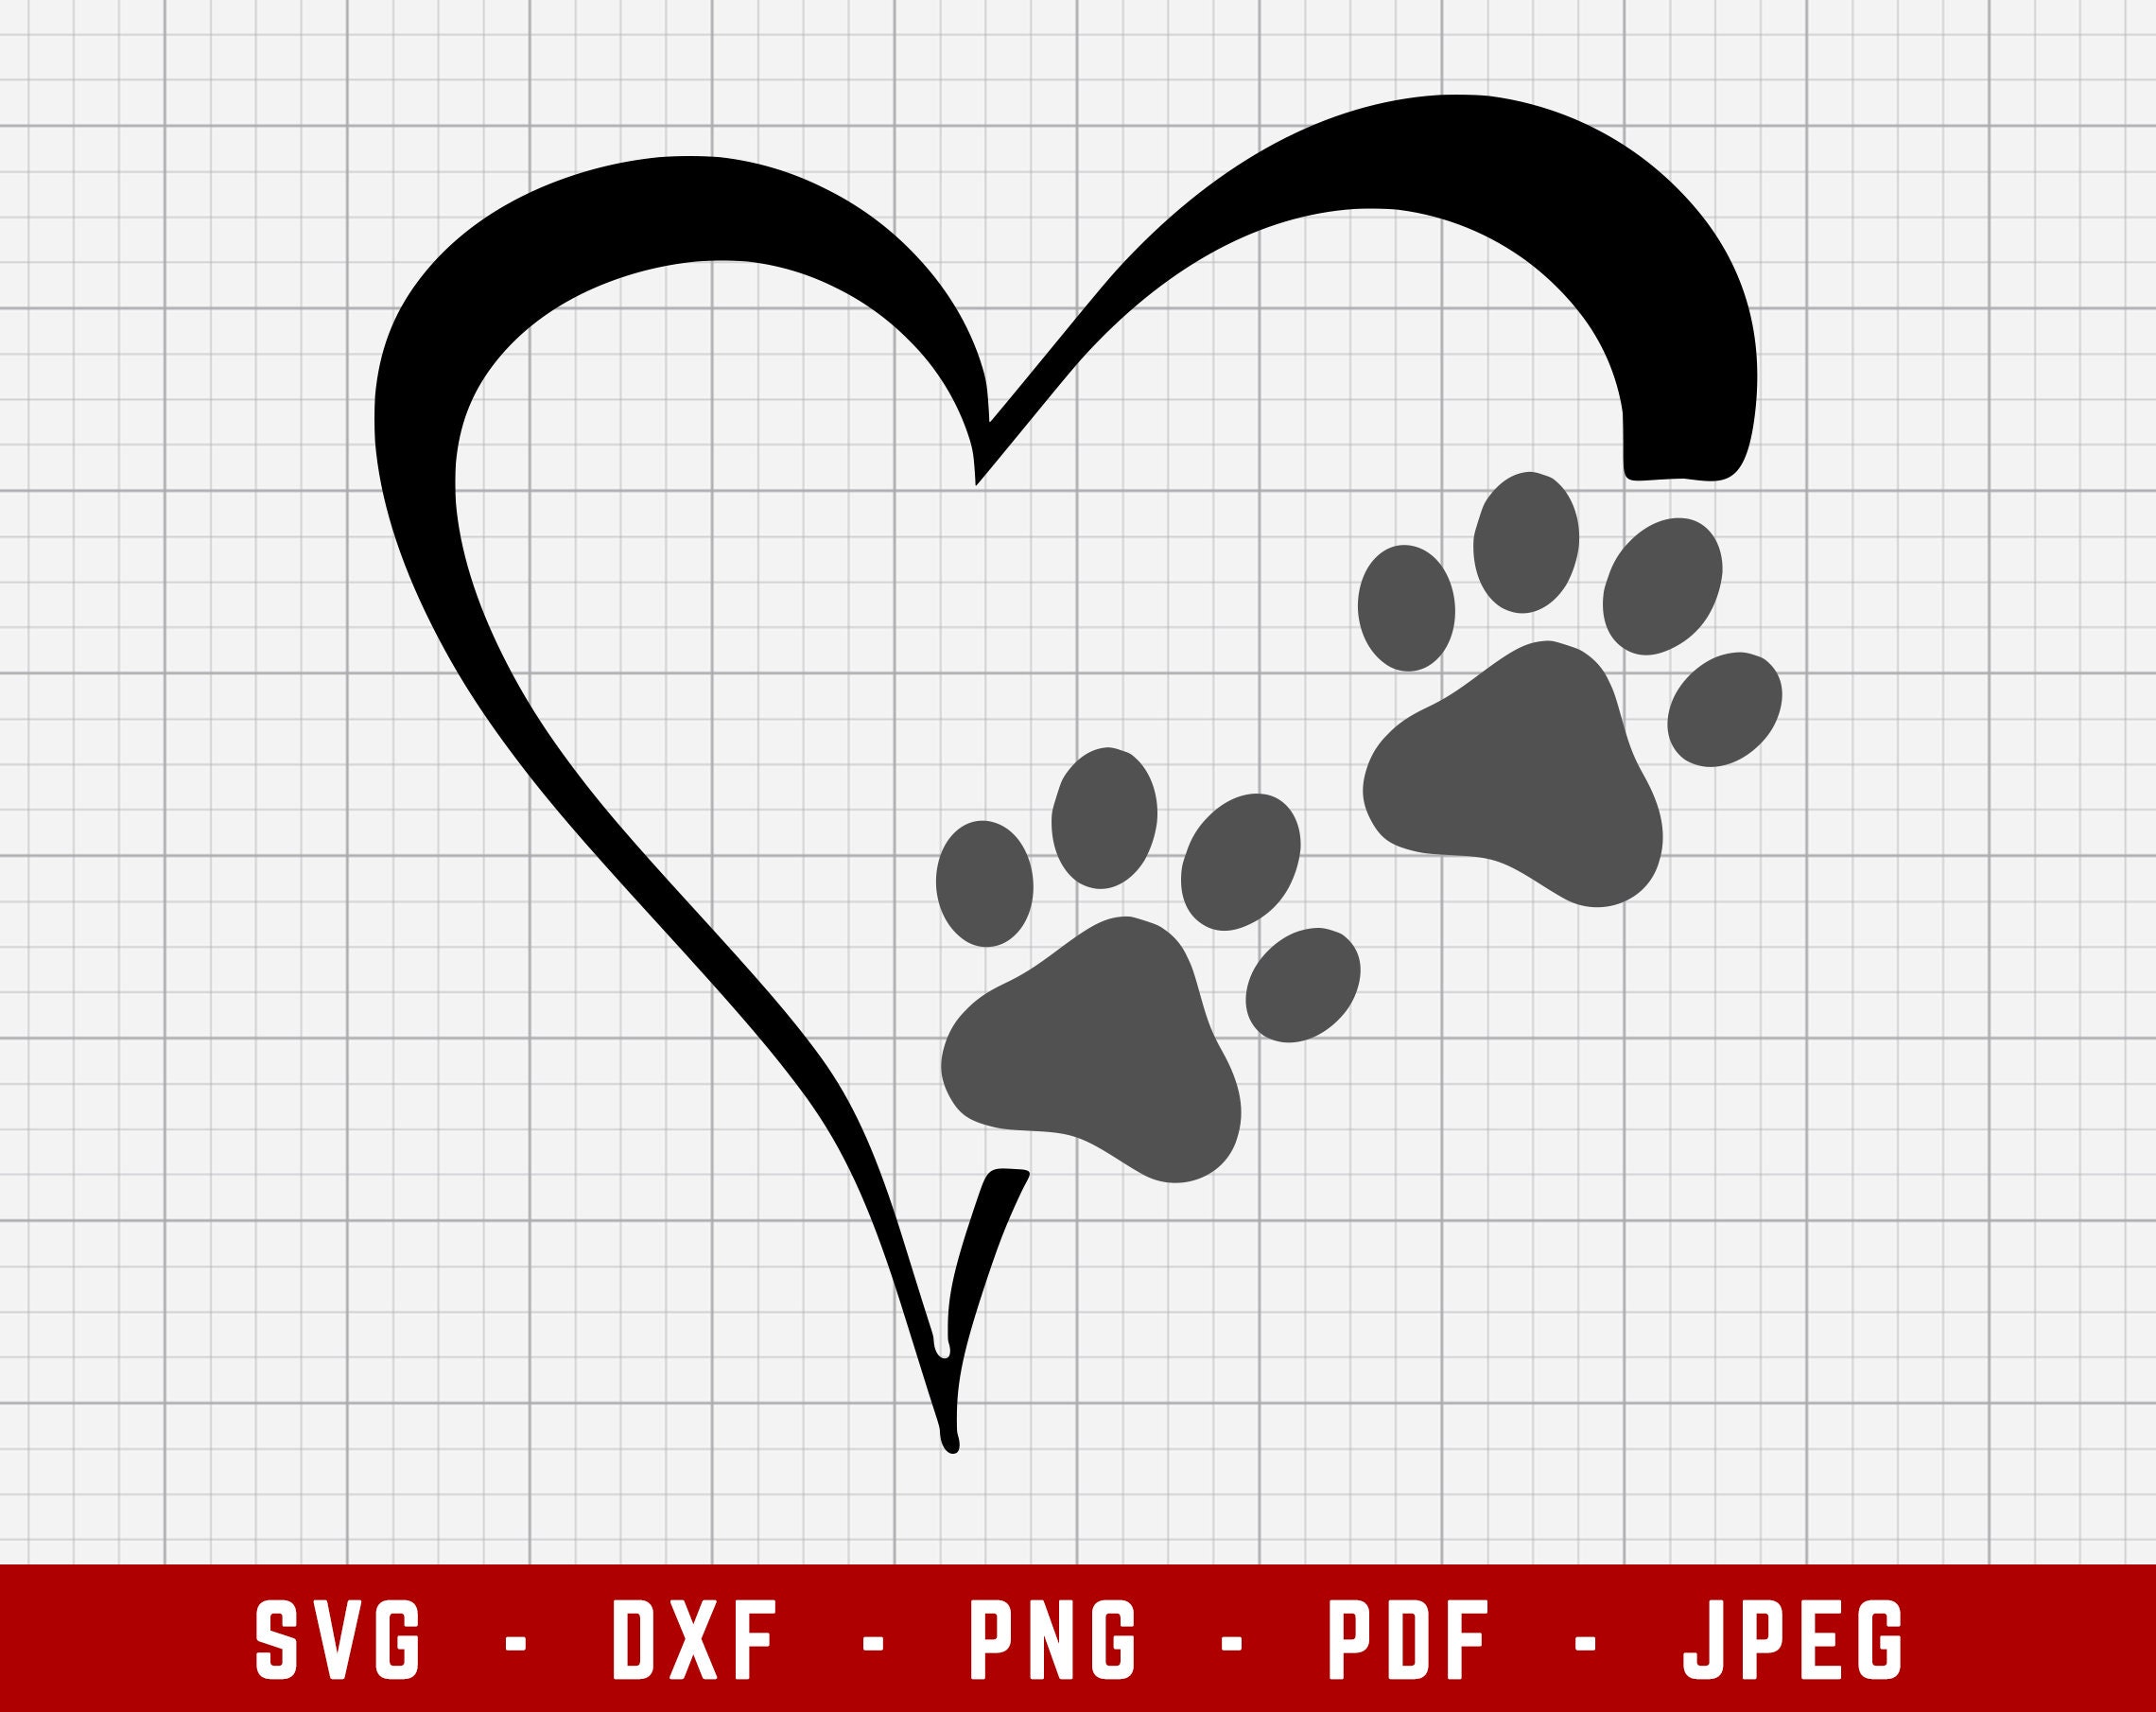 Dog Paw Prints - free svg file for members - SVG Heart